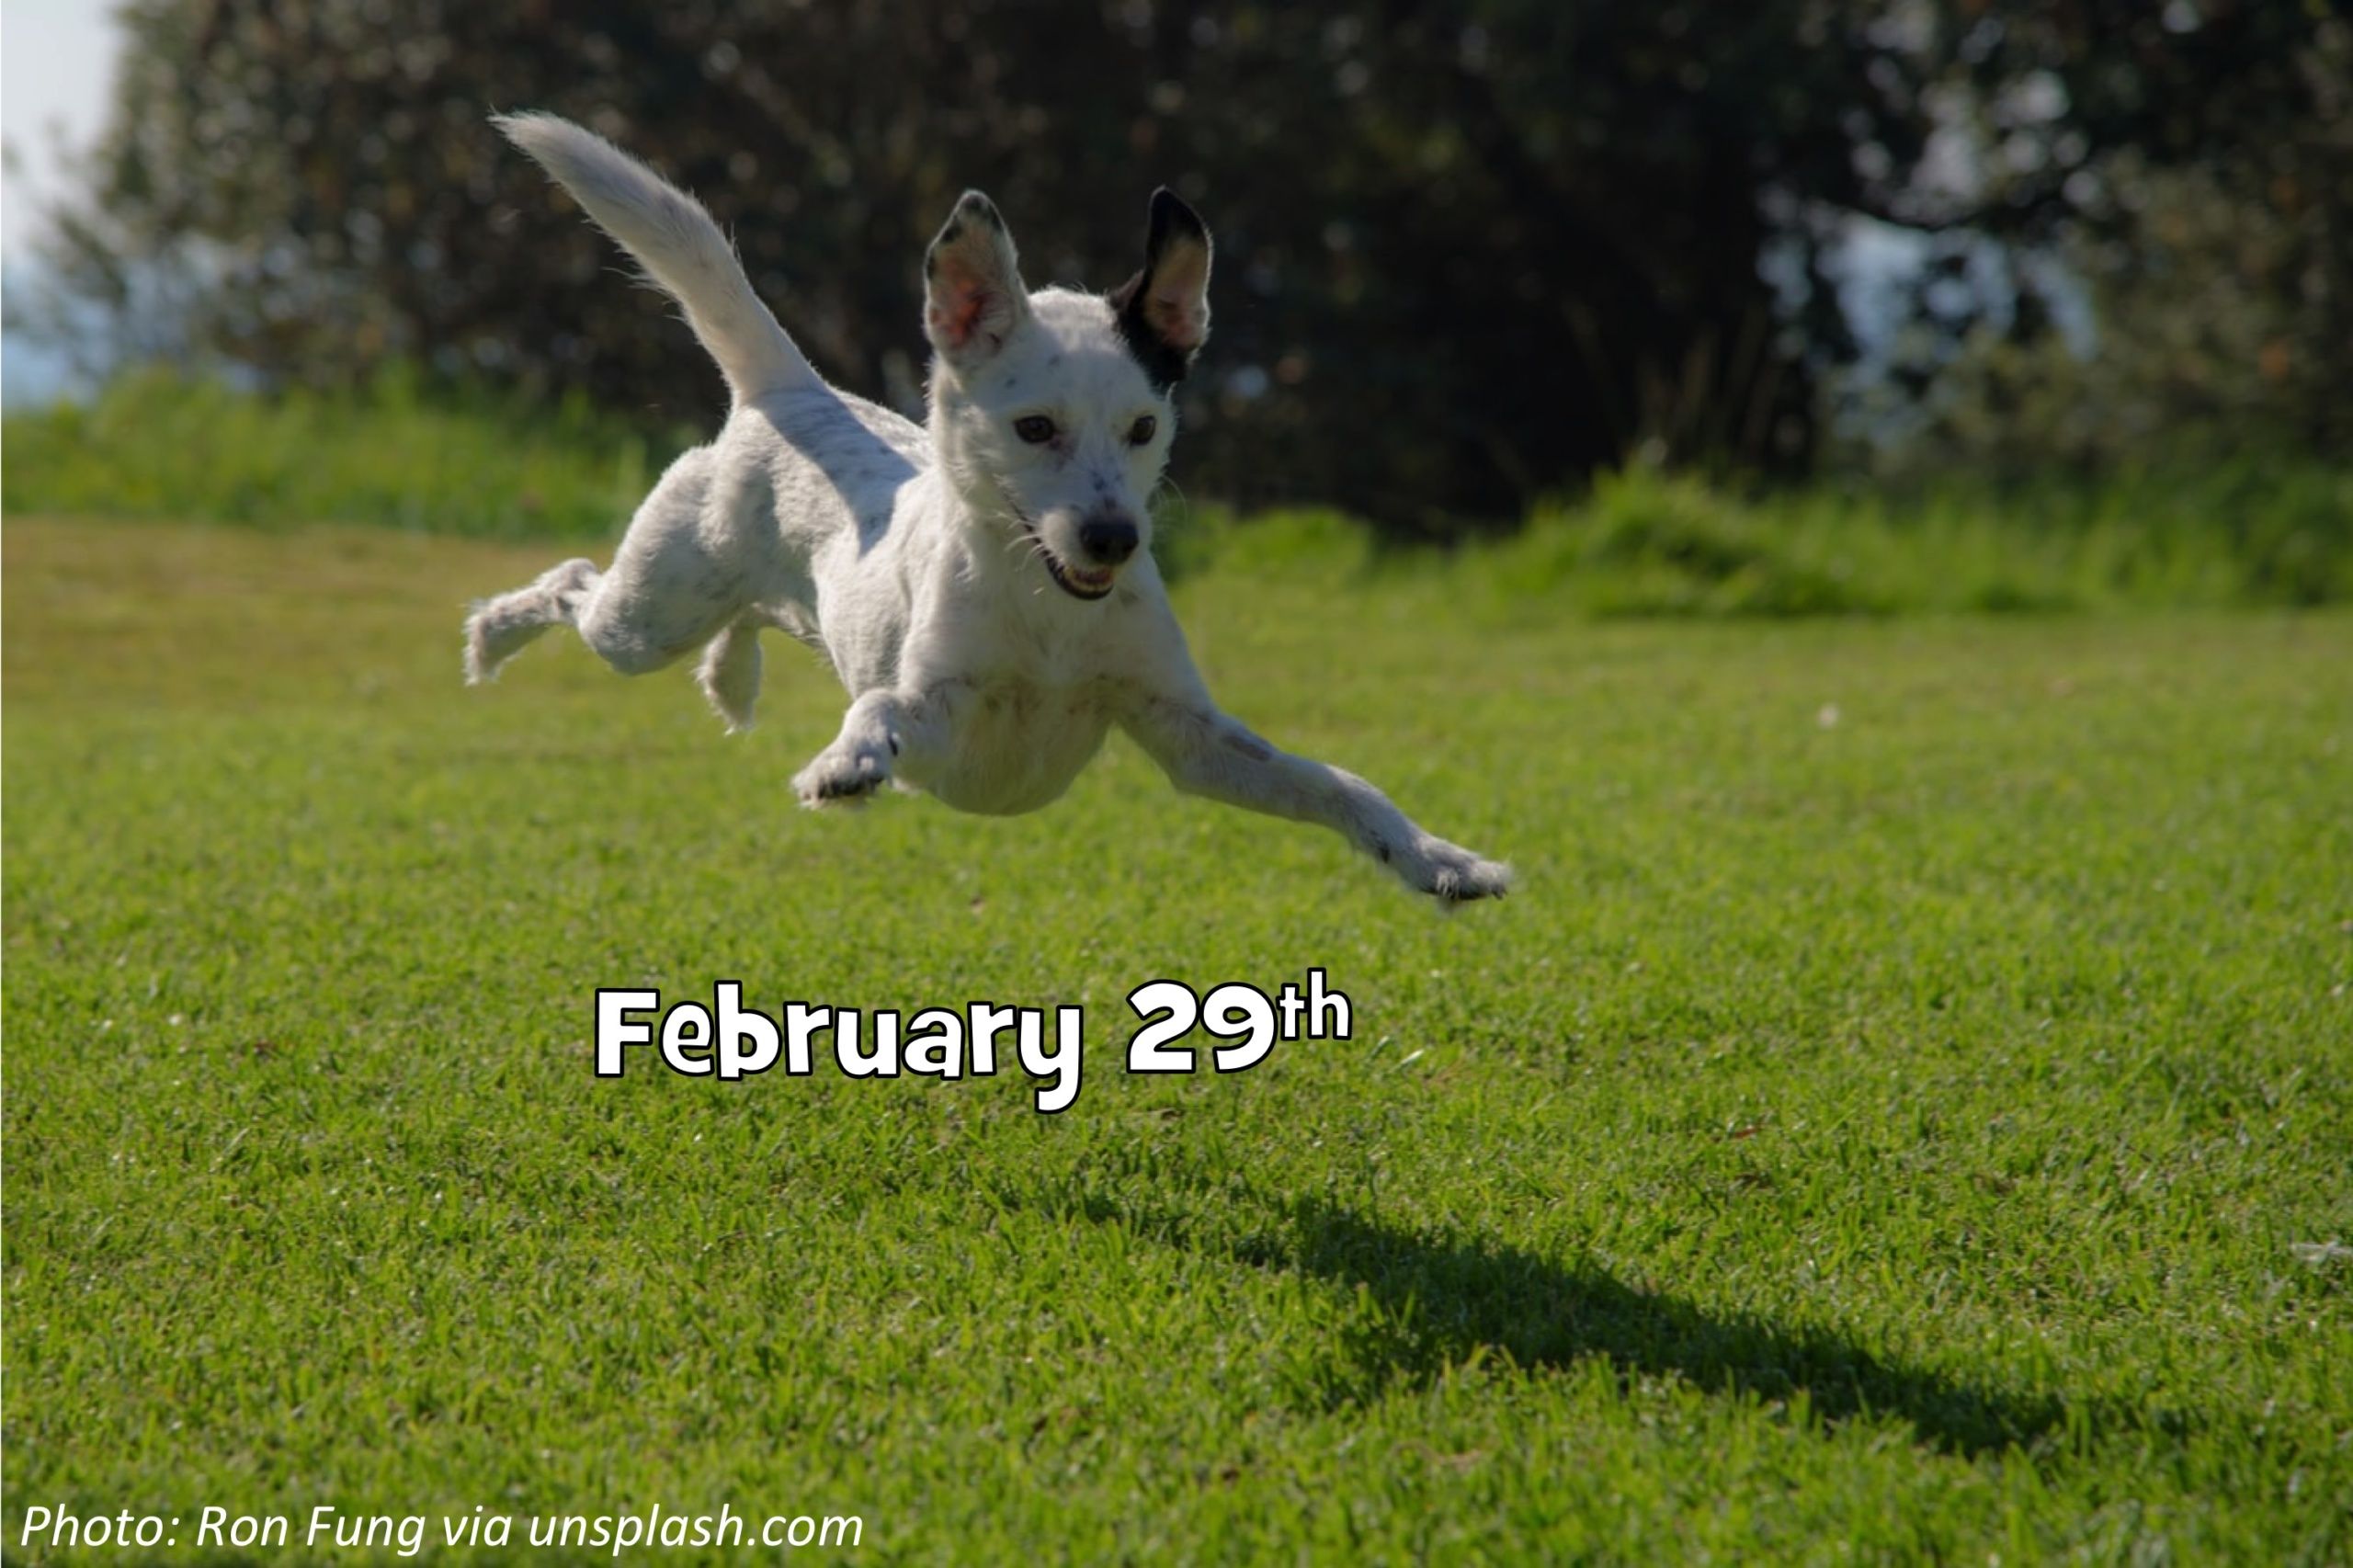 Leap Day!